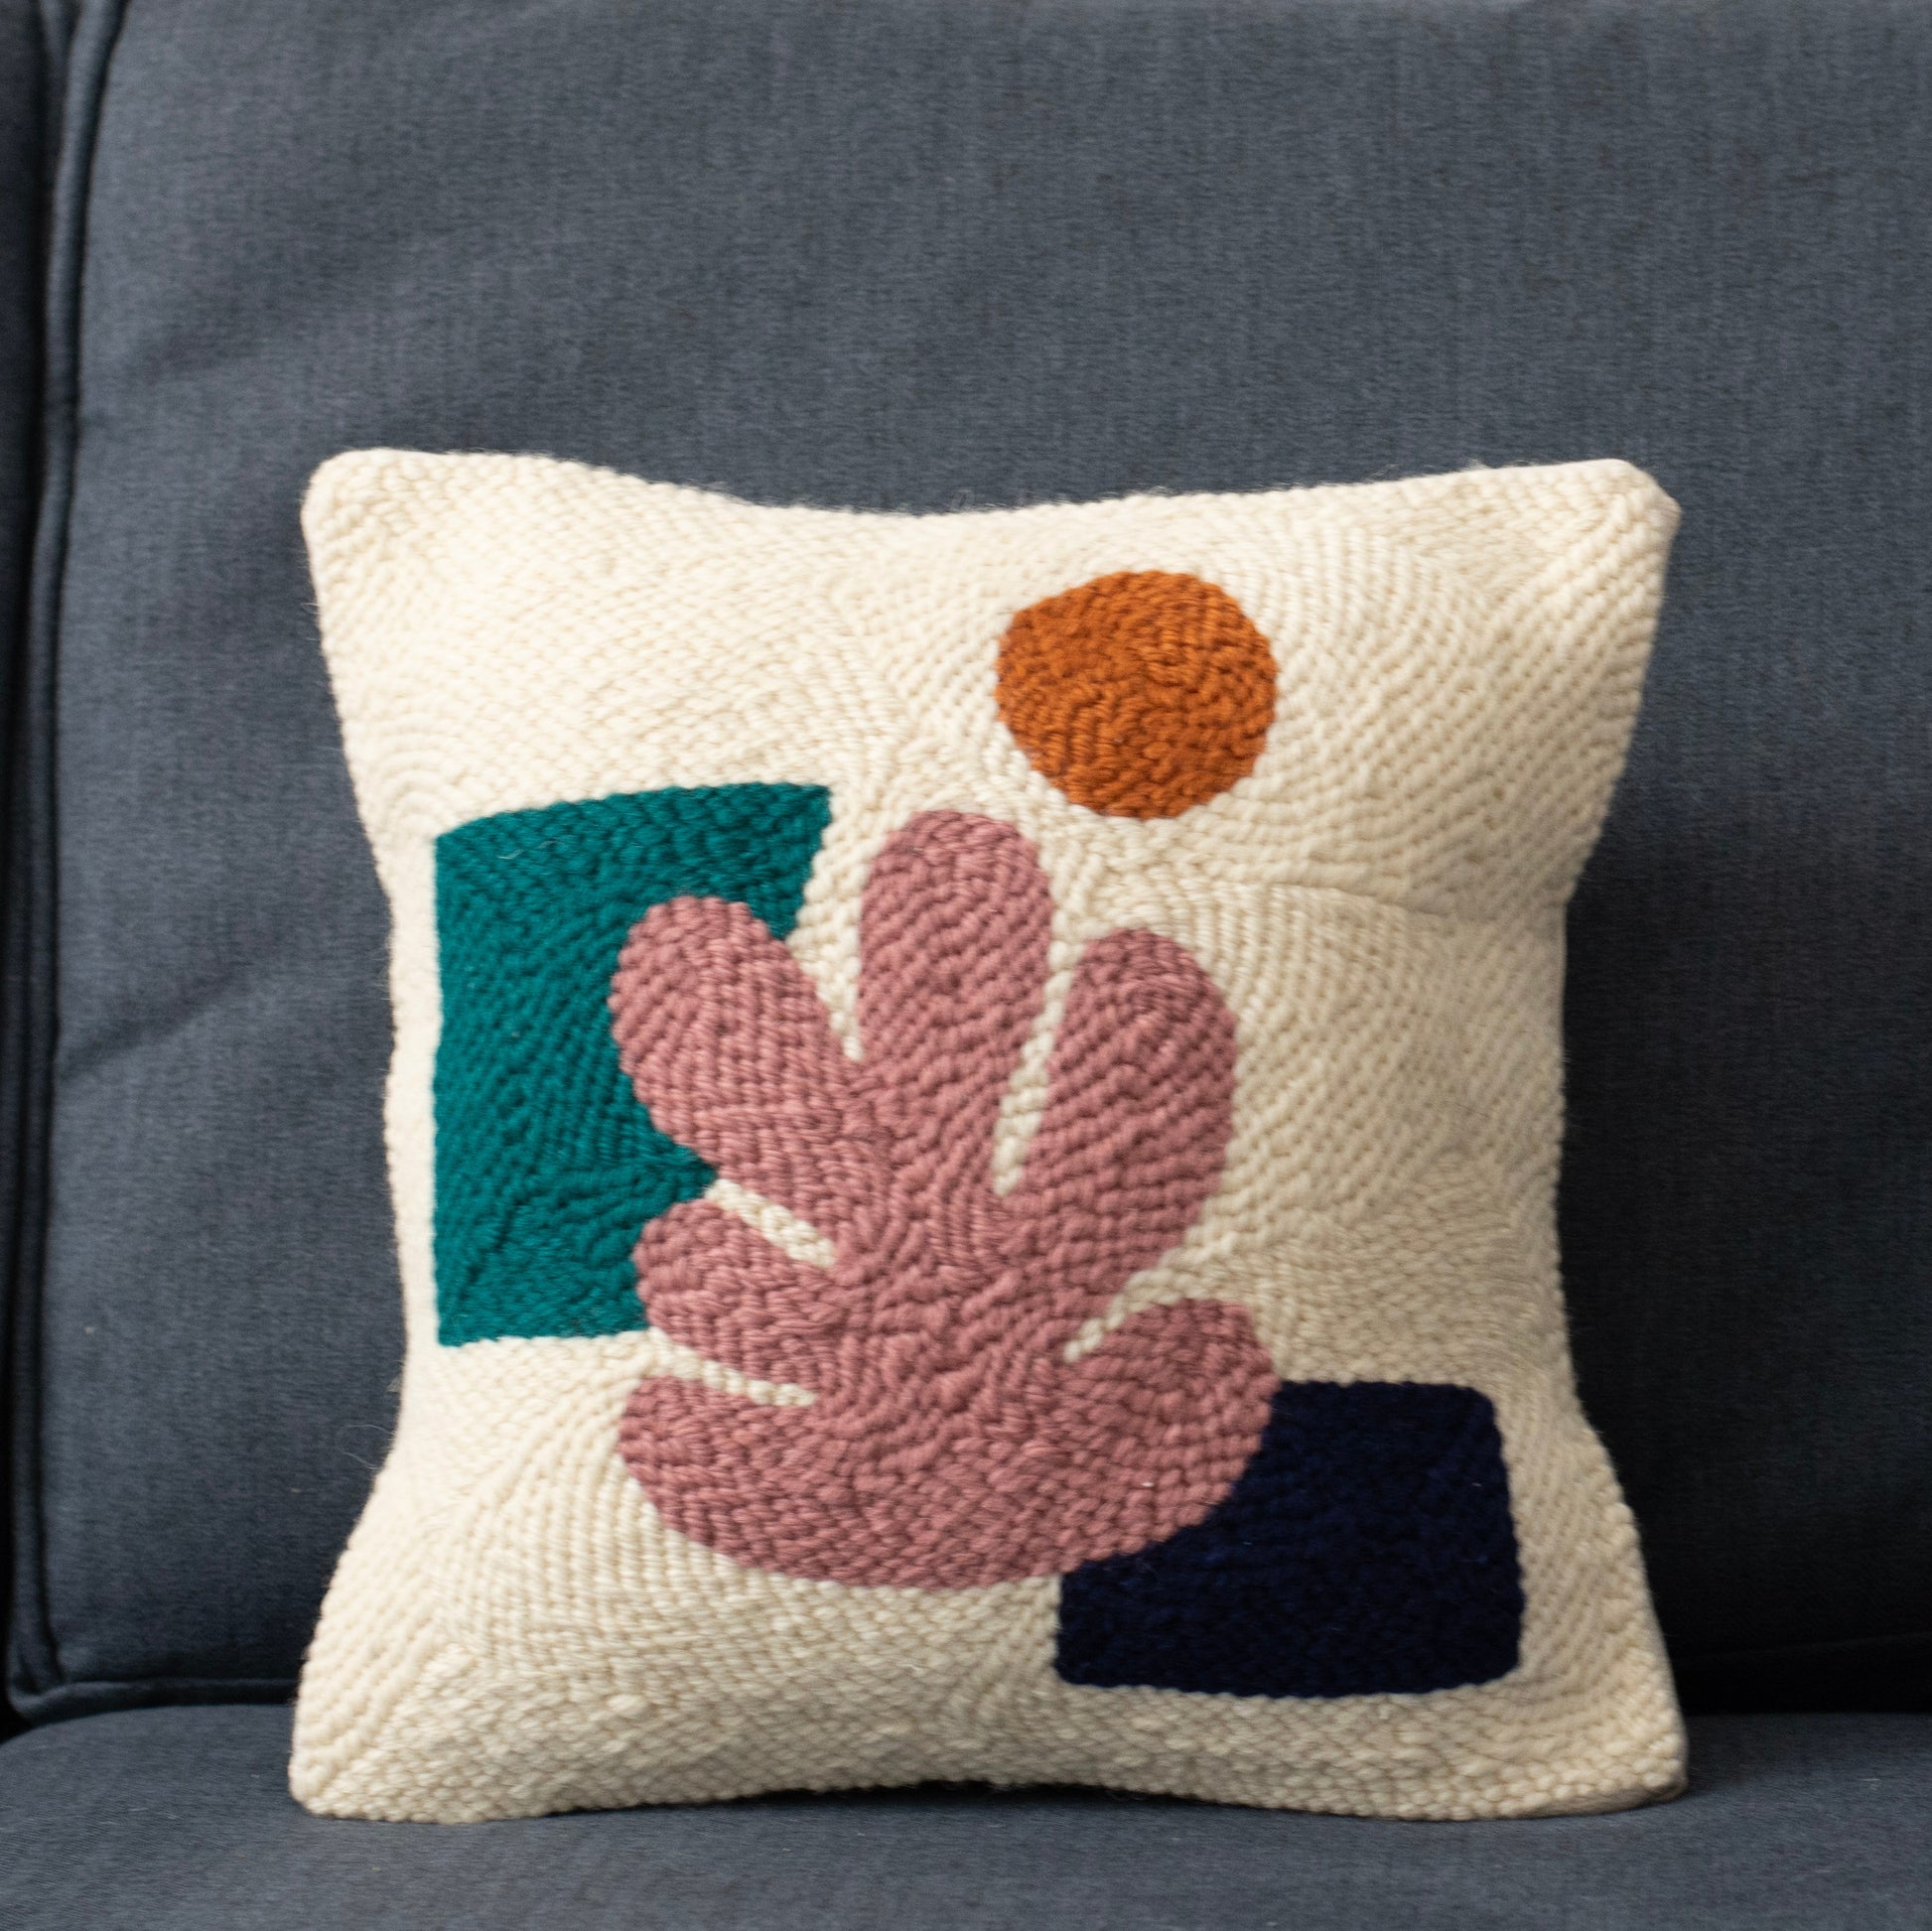 Abstract Matisse Punch Needle Cushion Kit